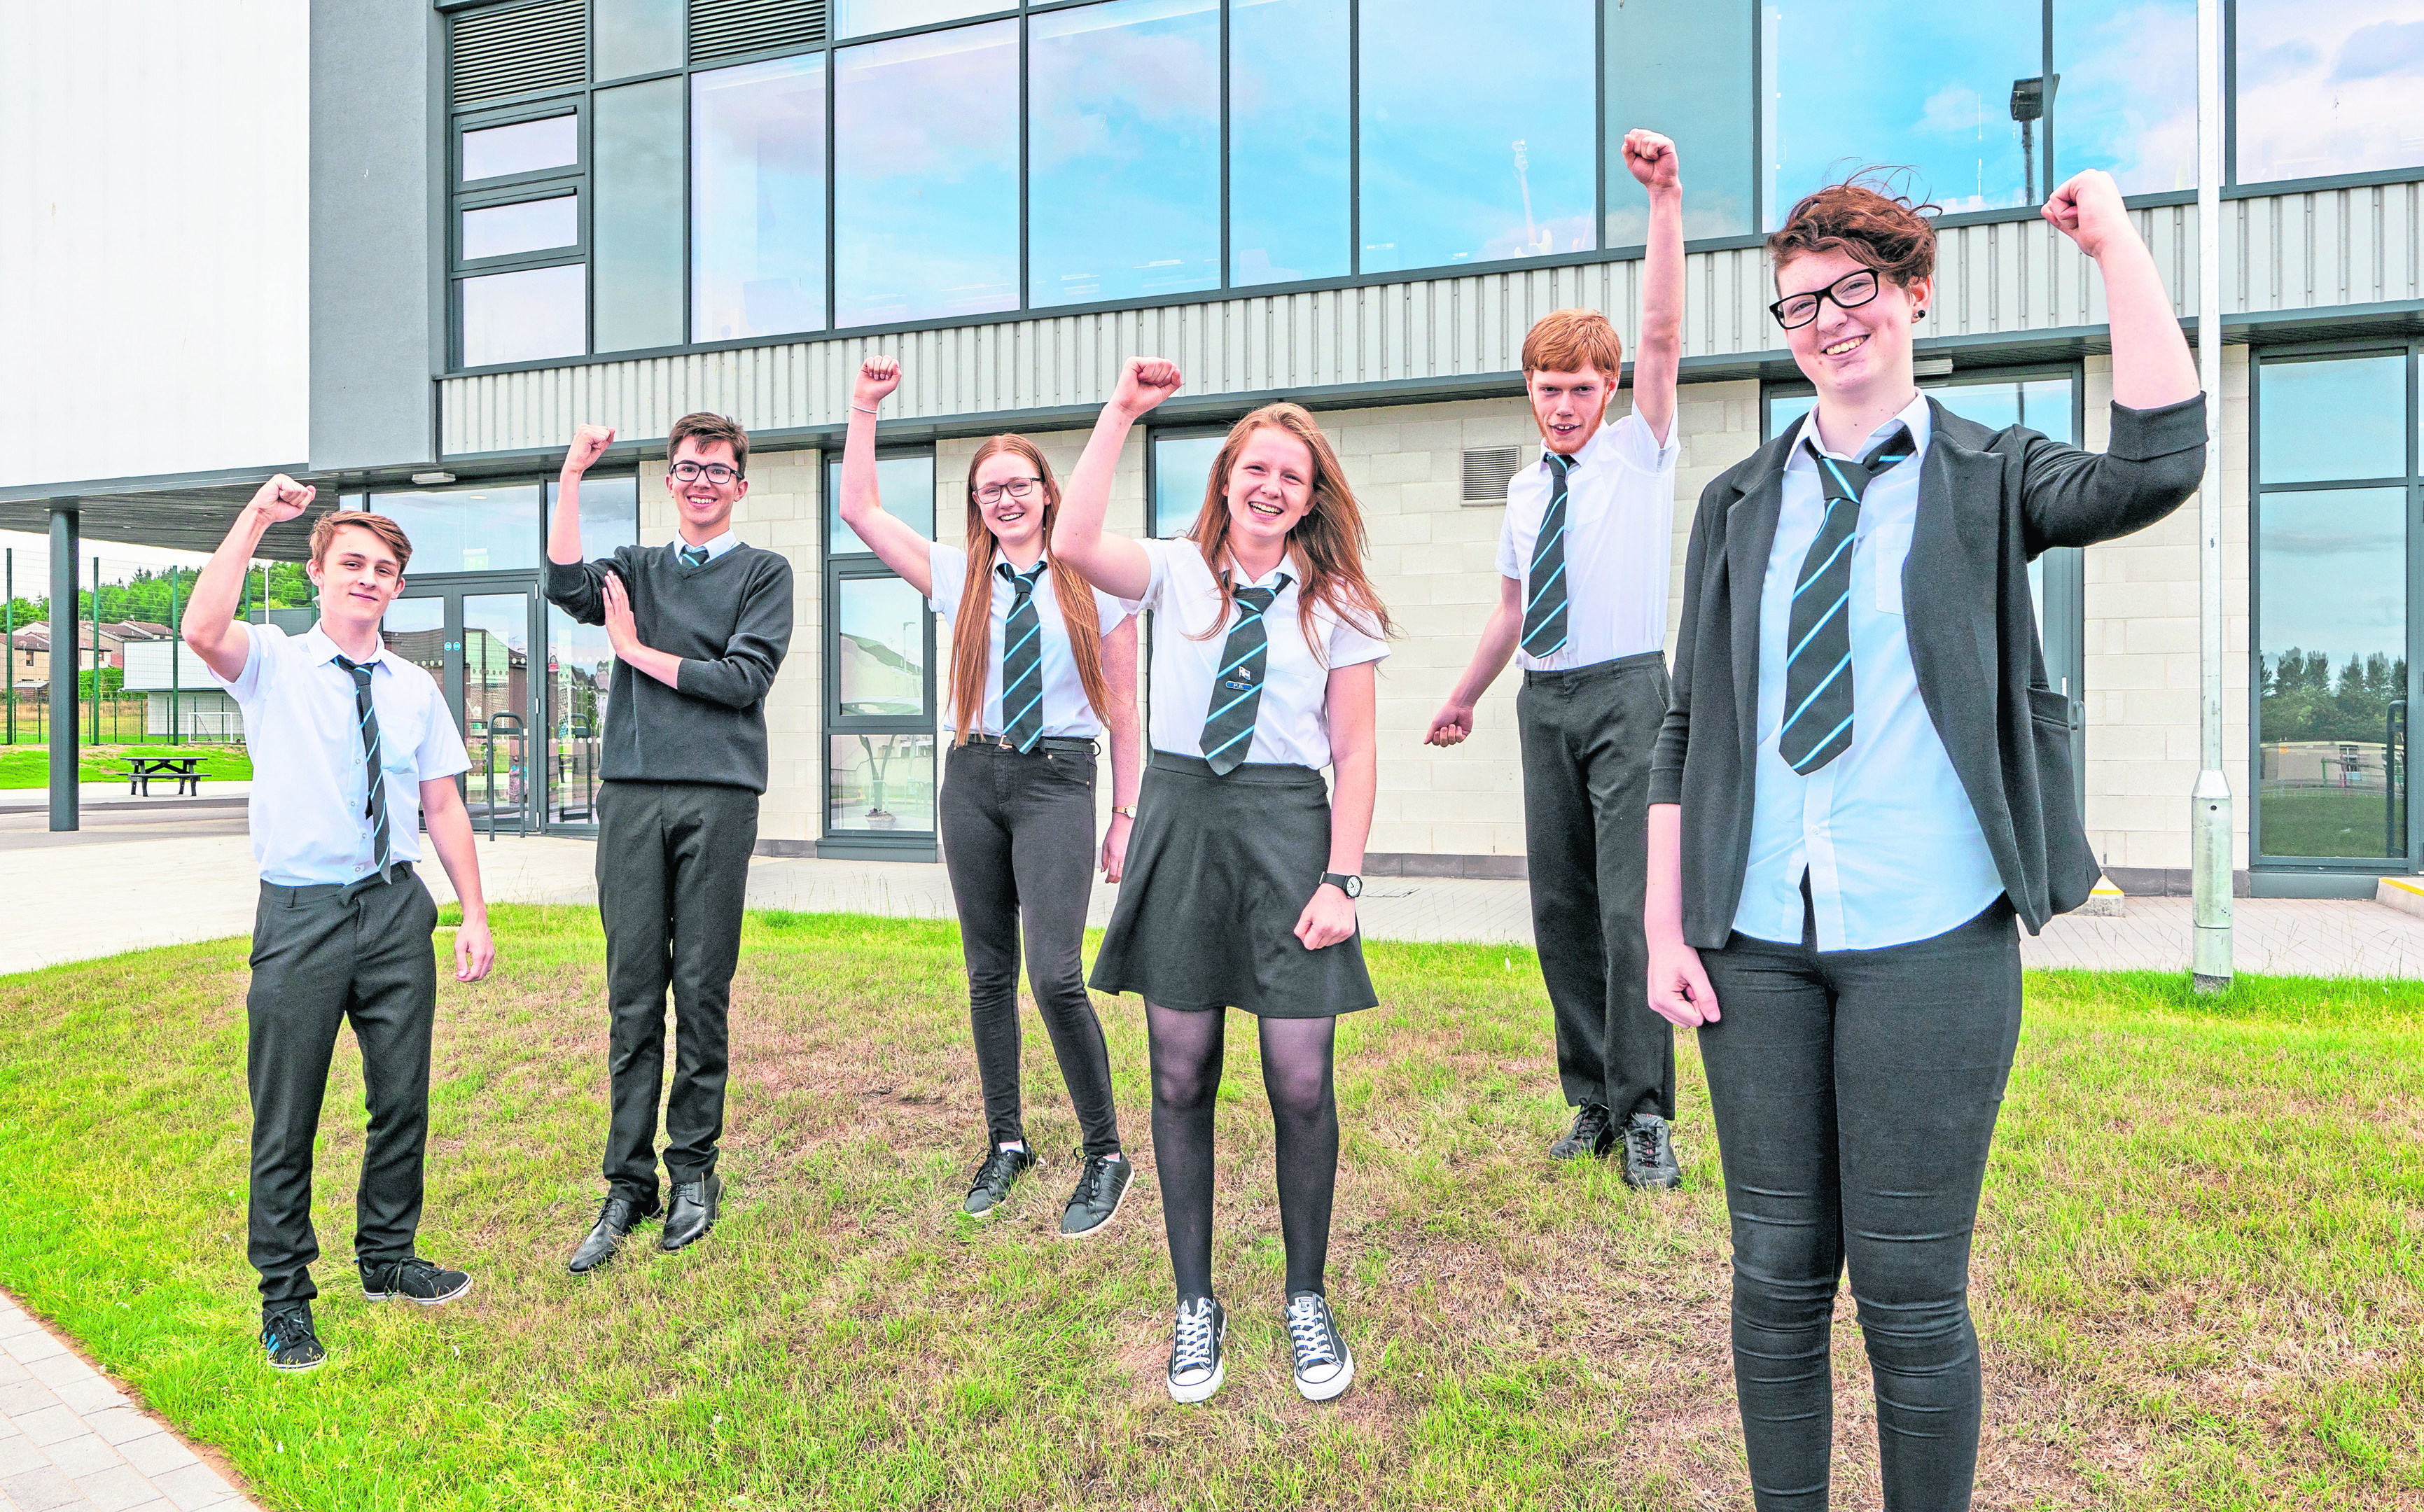 L-R - Angus Little, Stewart Ewen,, Emily Sutherland,, Eilidh Stewart, Andrew McIntyre and Morgan McRitchie at Elgin High School all jumping for joy at passing their exams.